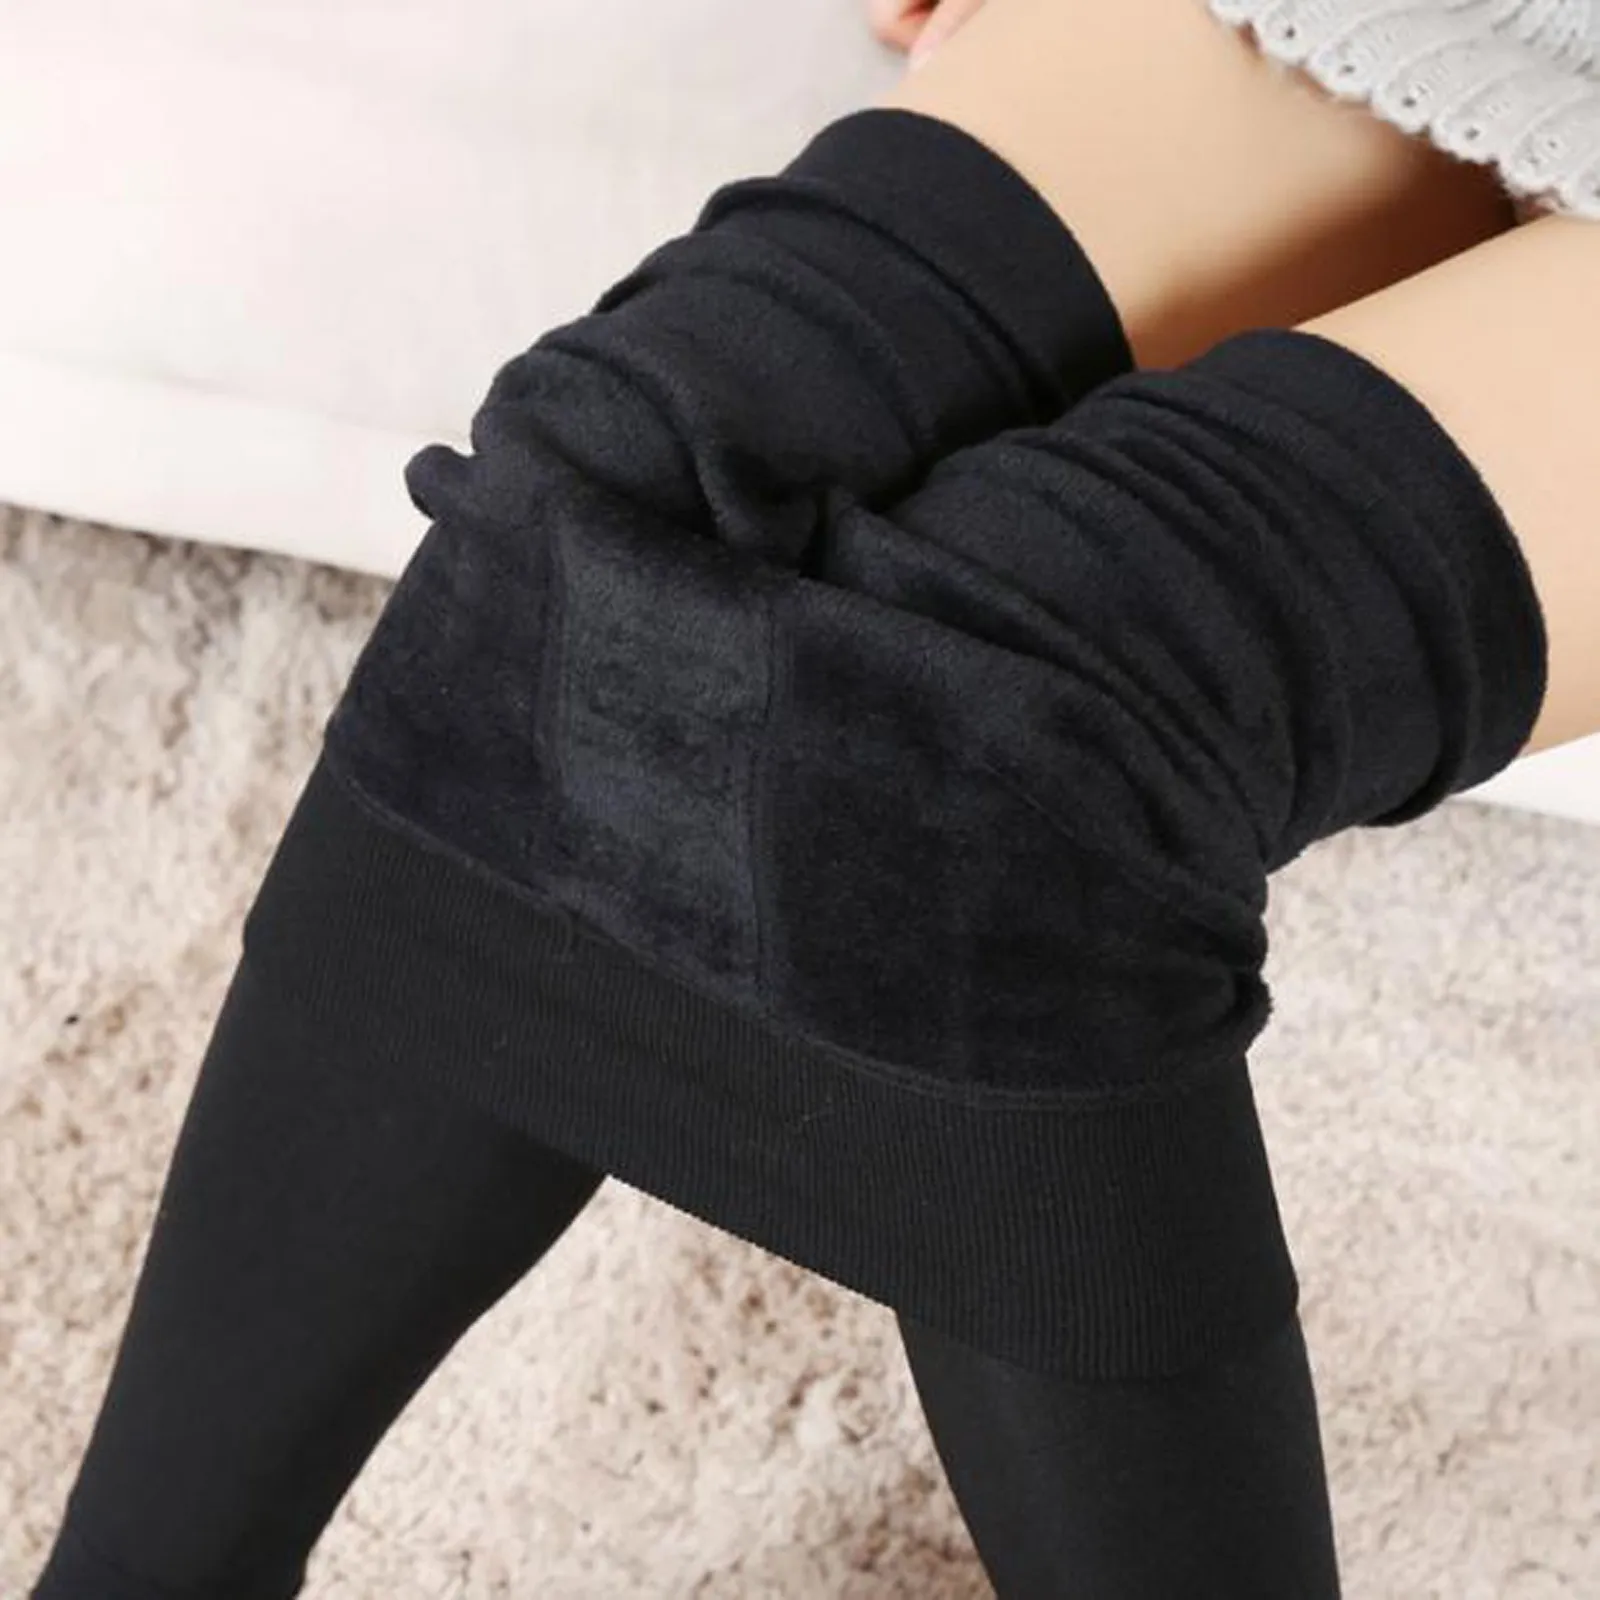 Winter Warm Legging Trousers Solid Women Velvet Thick Leggings Pants High Waist Elastic Tight Female Workout Cropped Underwear office lady women winter warm pants velvet thick trousers high waist elastic middle aged mother stretch straight pants 5xl